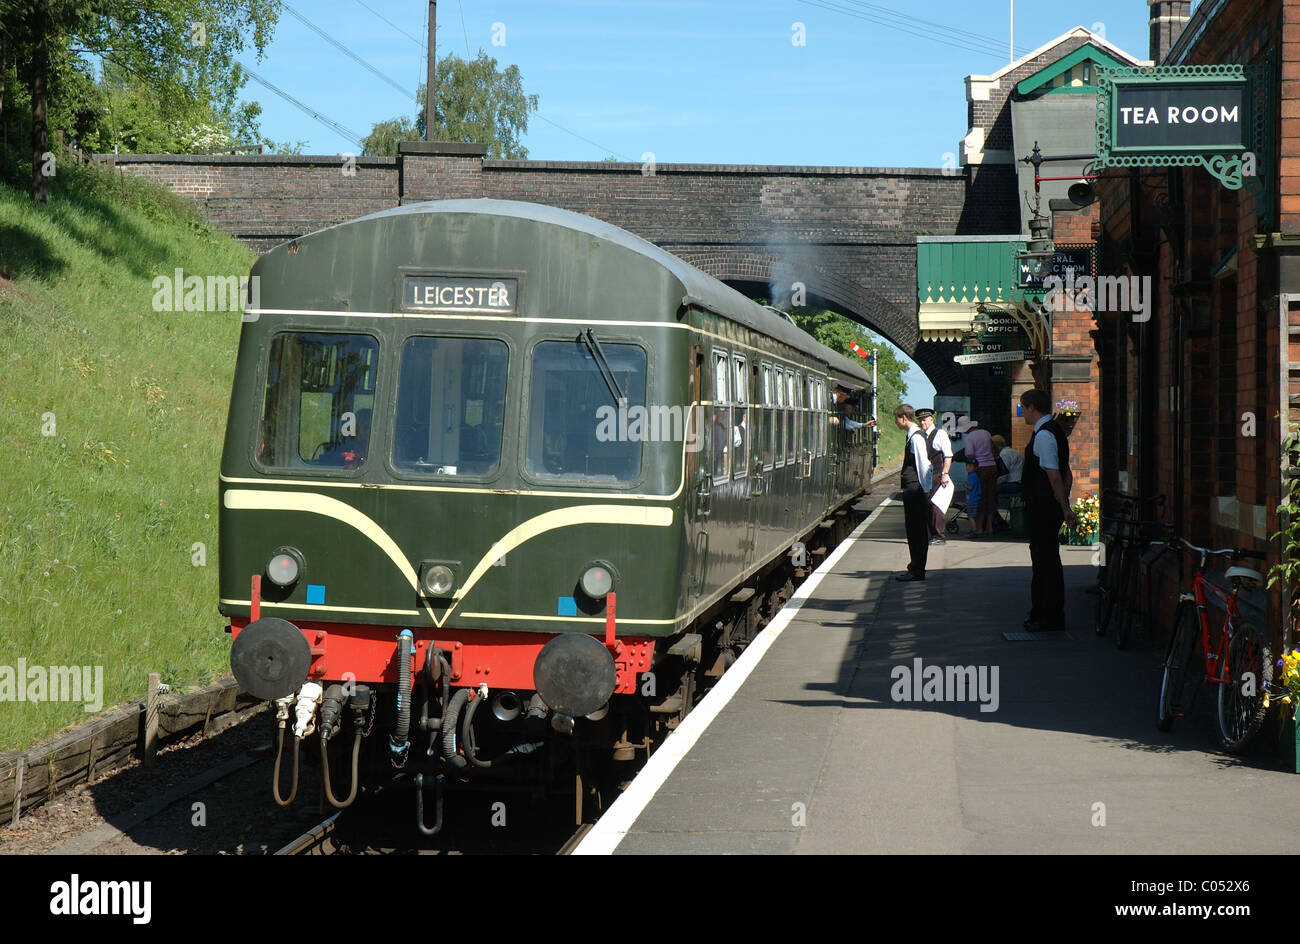 DMU, Diesel Multiple Unit train at Rothley station on the Great Central Railway, Leicestershire, England, UK Stock Photo